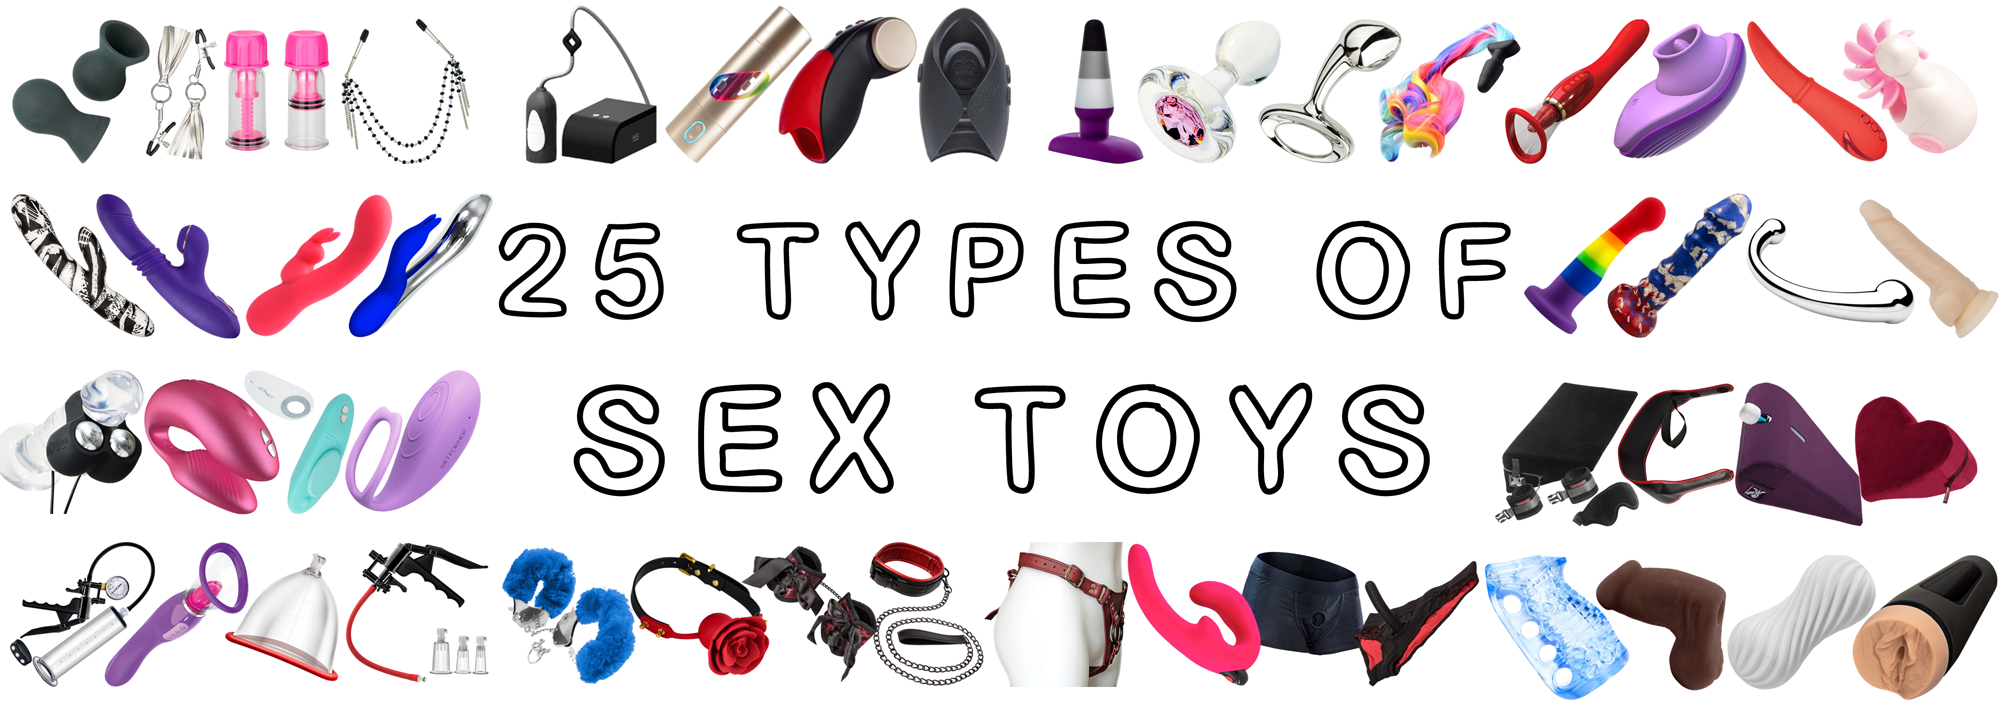 alex ambrosio recommends kinky sex toys tumblr pic